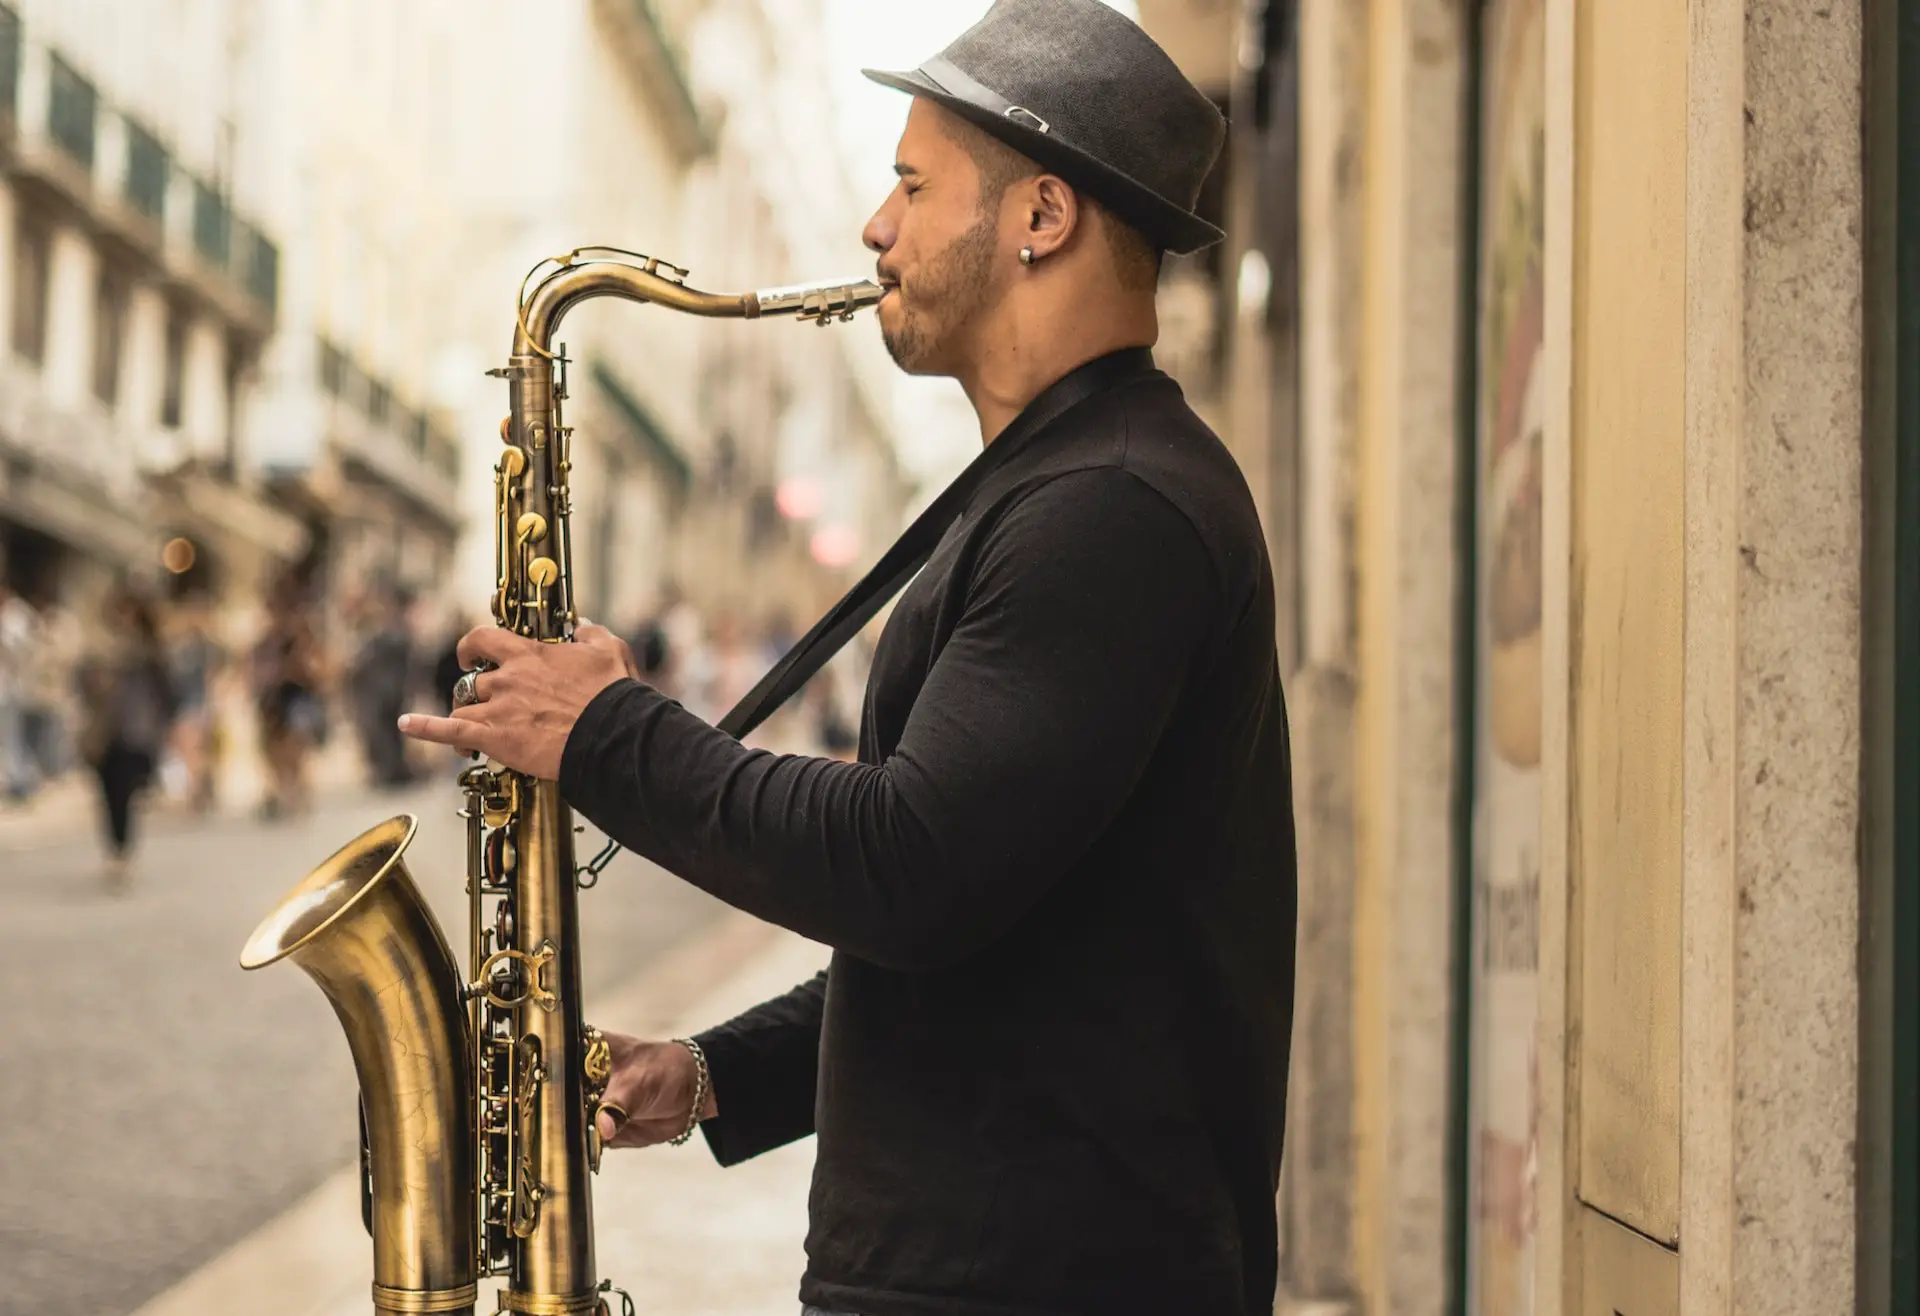 Image of a musician playing the saxophone on the streets. Source: unsplash